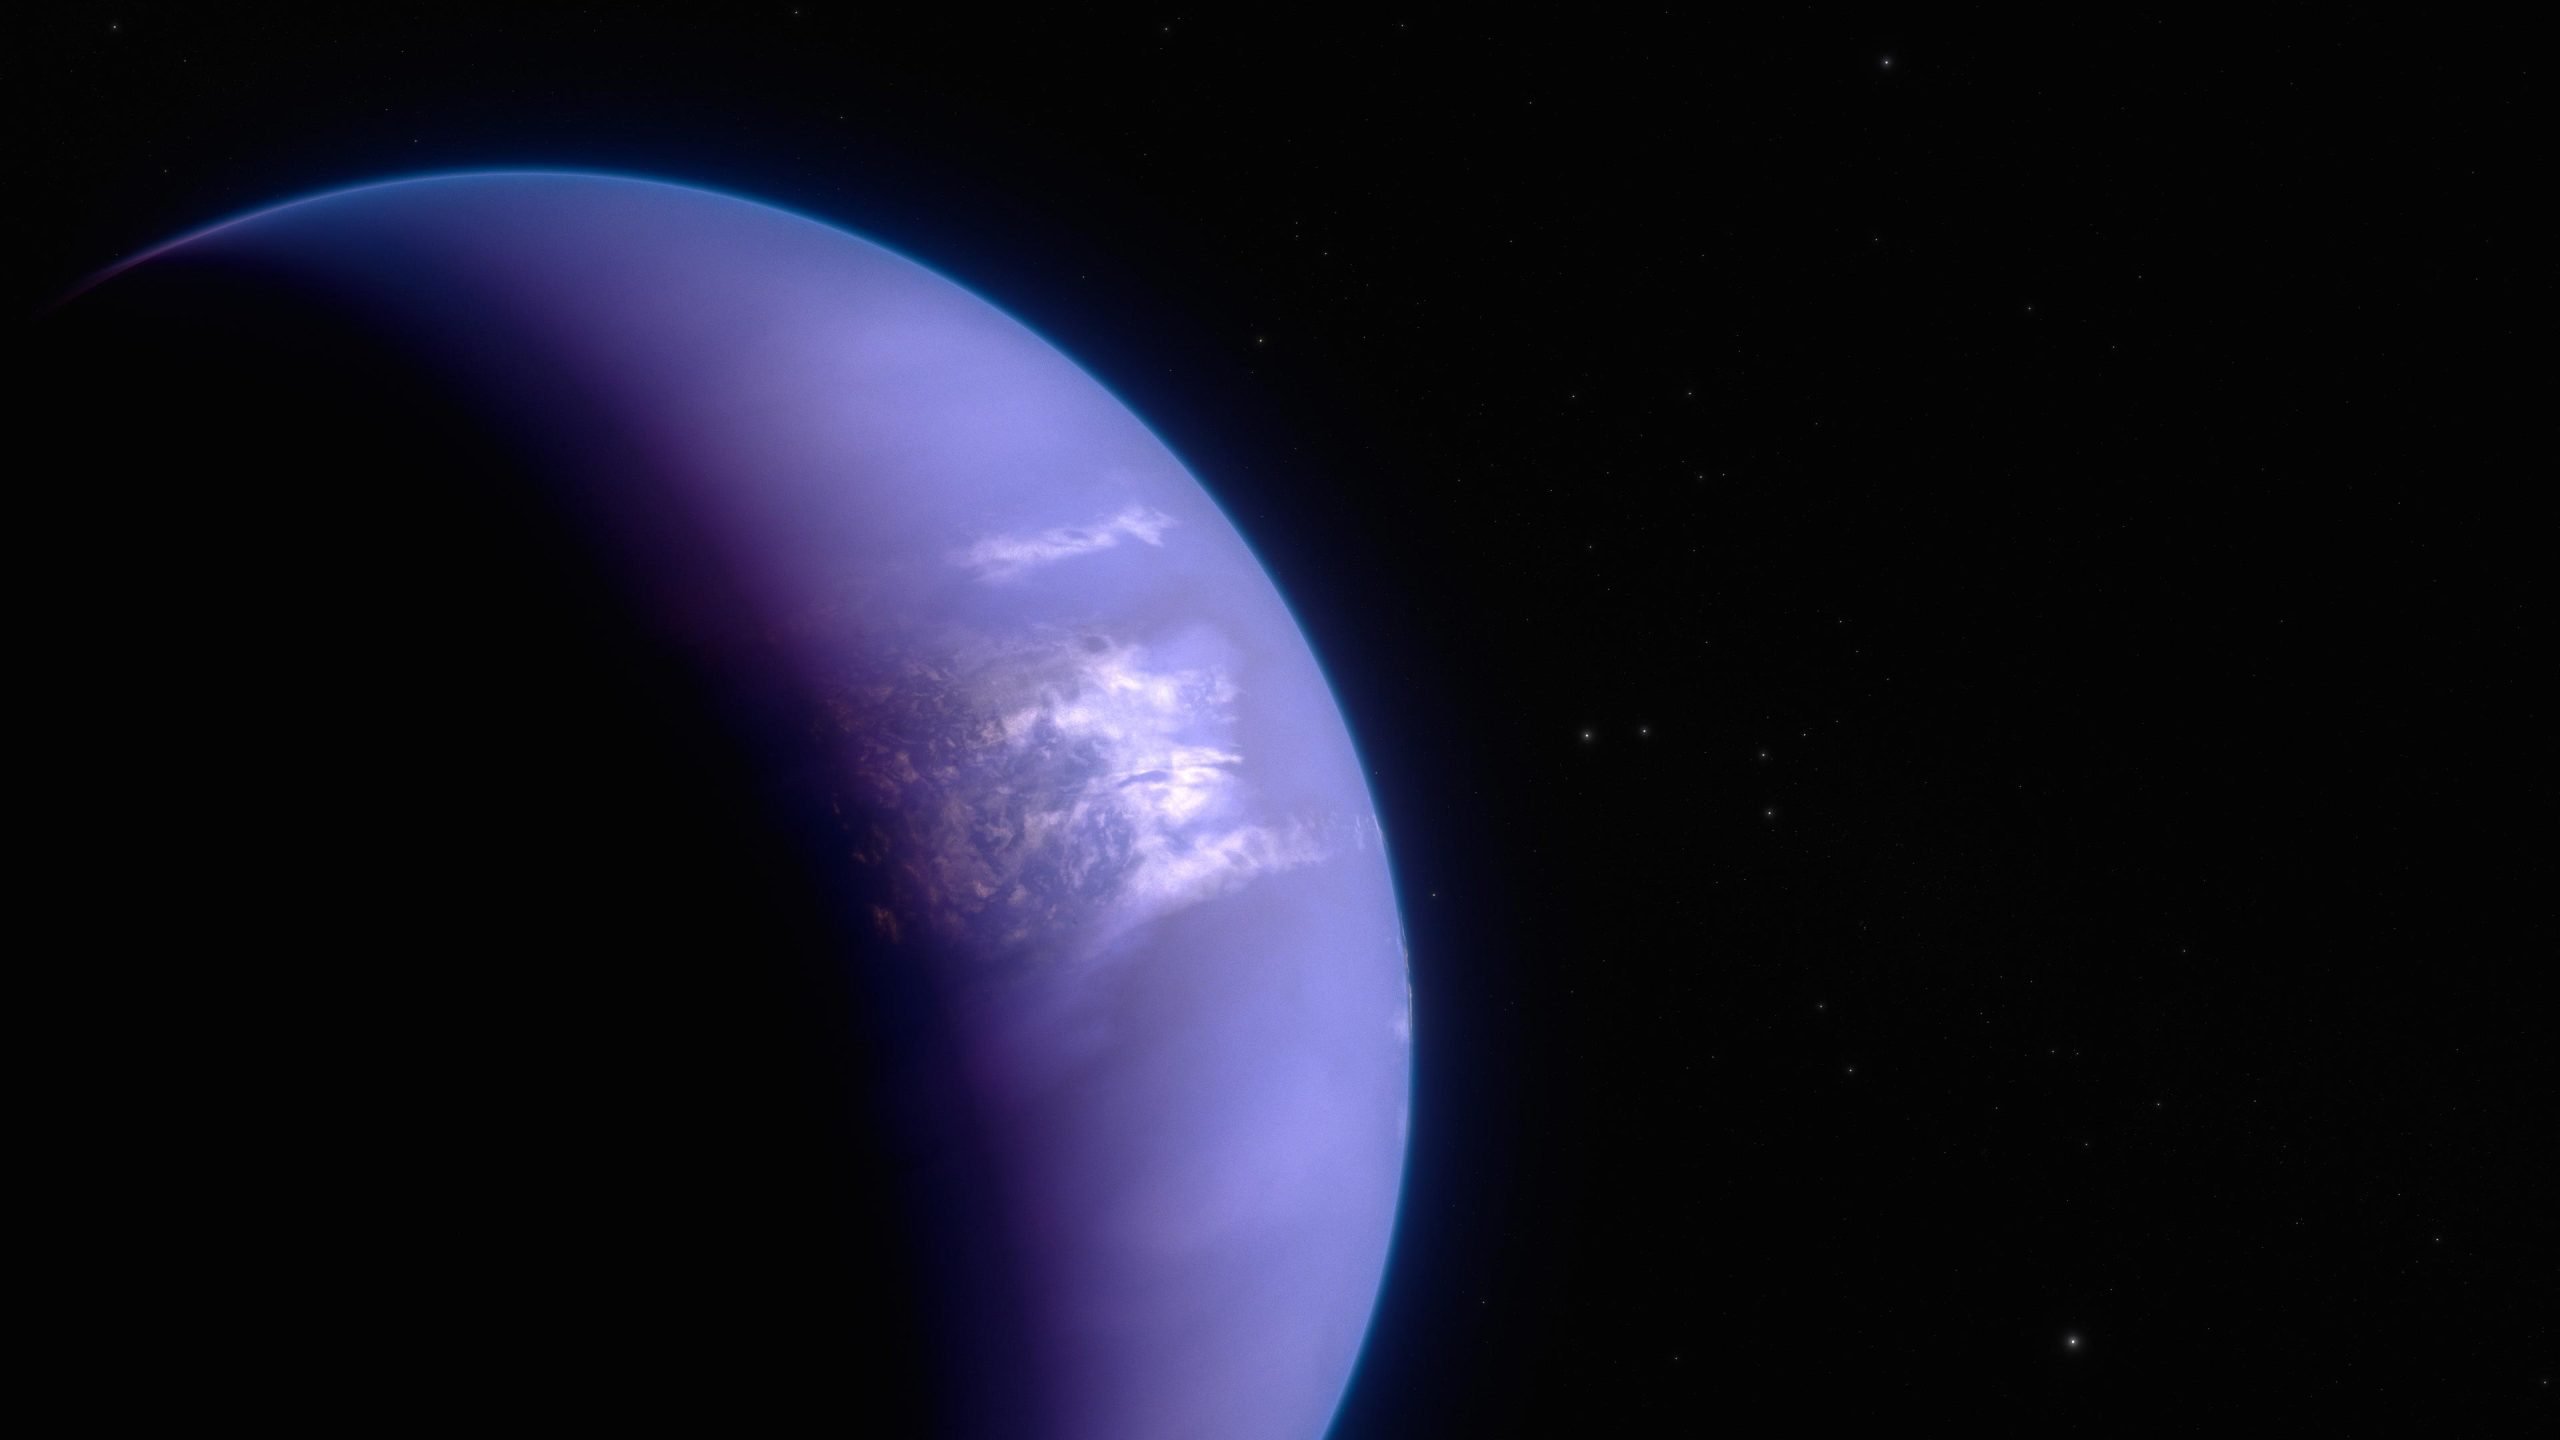 Weather web maps on the exoplanet WASP-43b